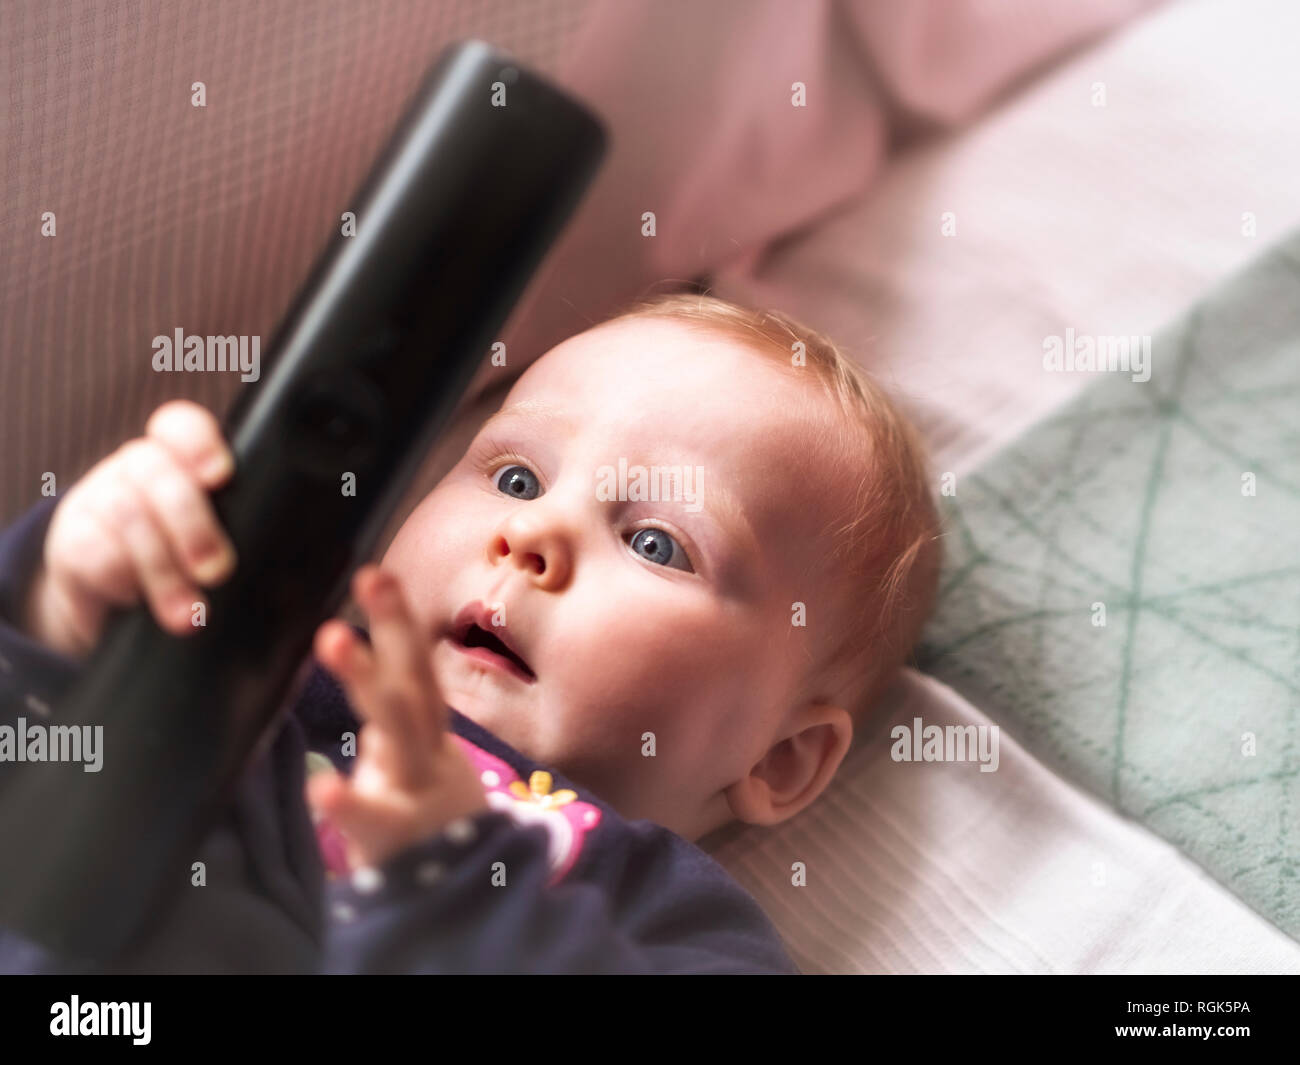 Baby girl holding remote control Stock Photo